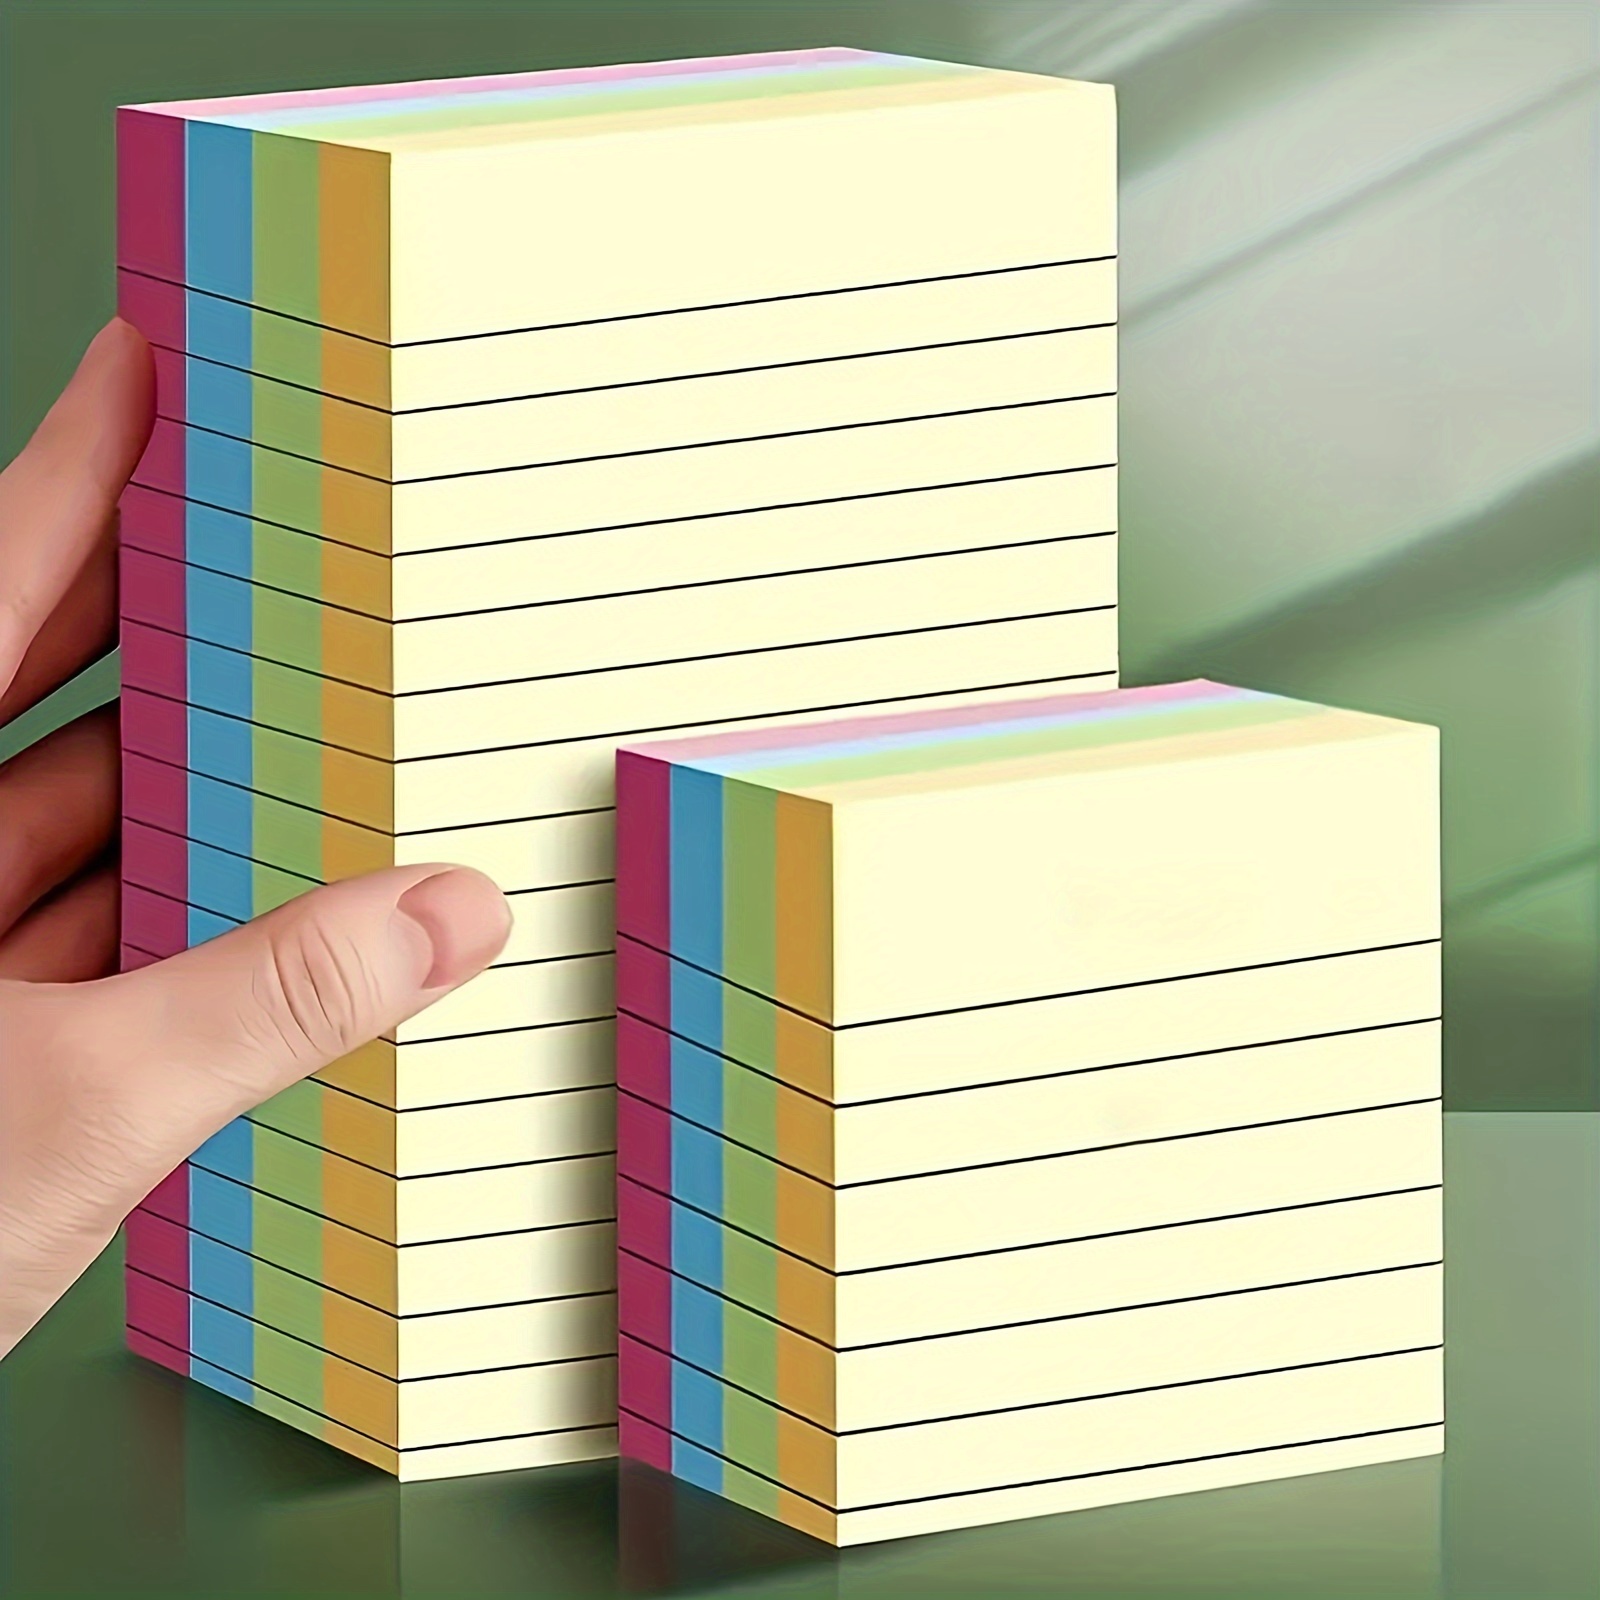 

200 Sheets Adhesive Sticky Notes: Oblong, Dual-size, 4 Vibrant Colors, Easy-to-apply, Lined For Clean Writing. Portable Notepad For Efficient Task Management At Home, Office, Or School